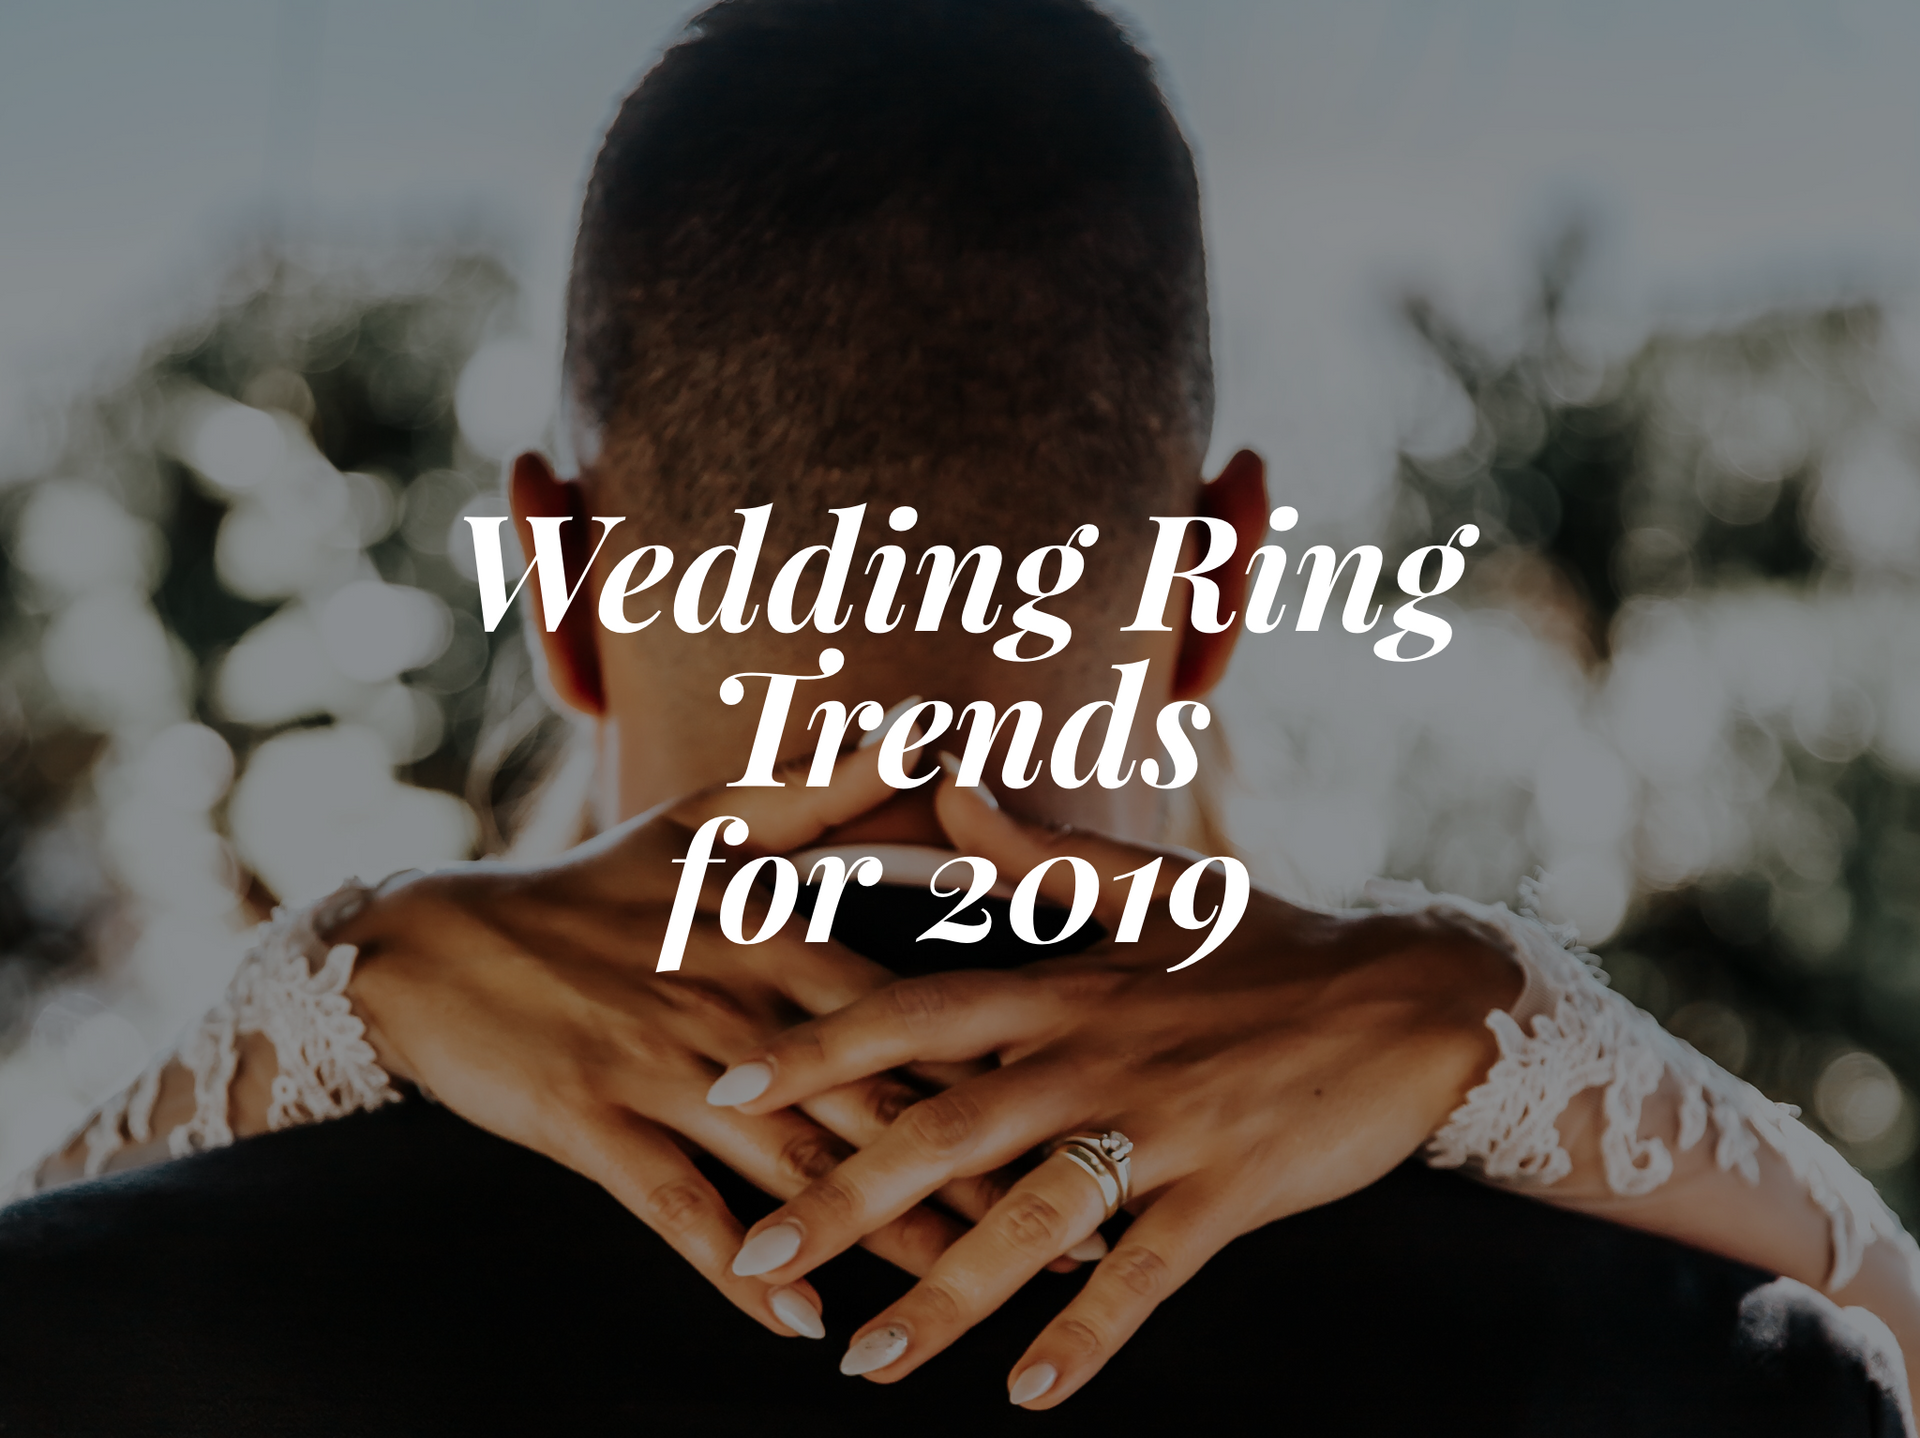 Wedding Ring Trends for 2019